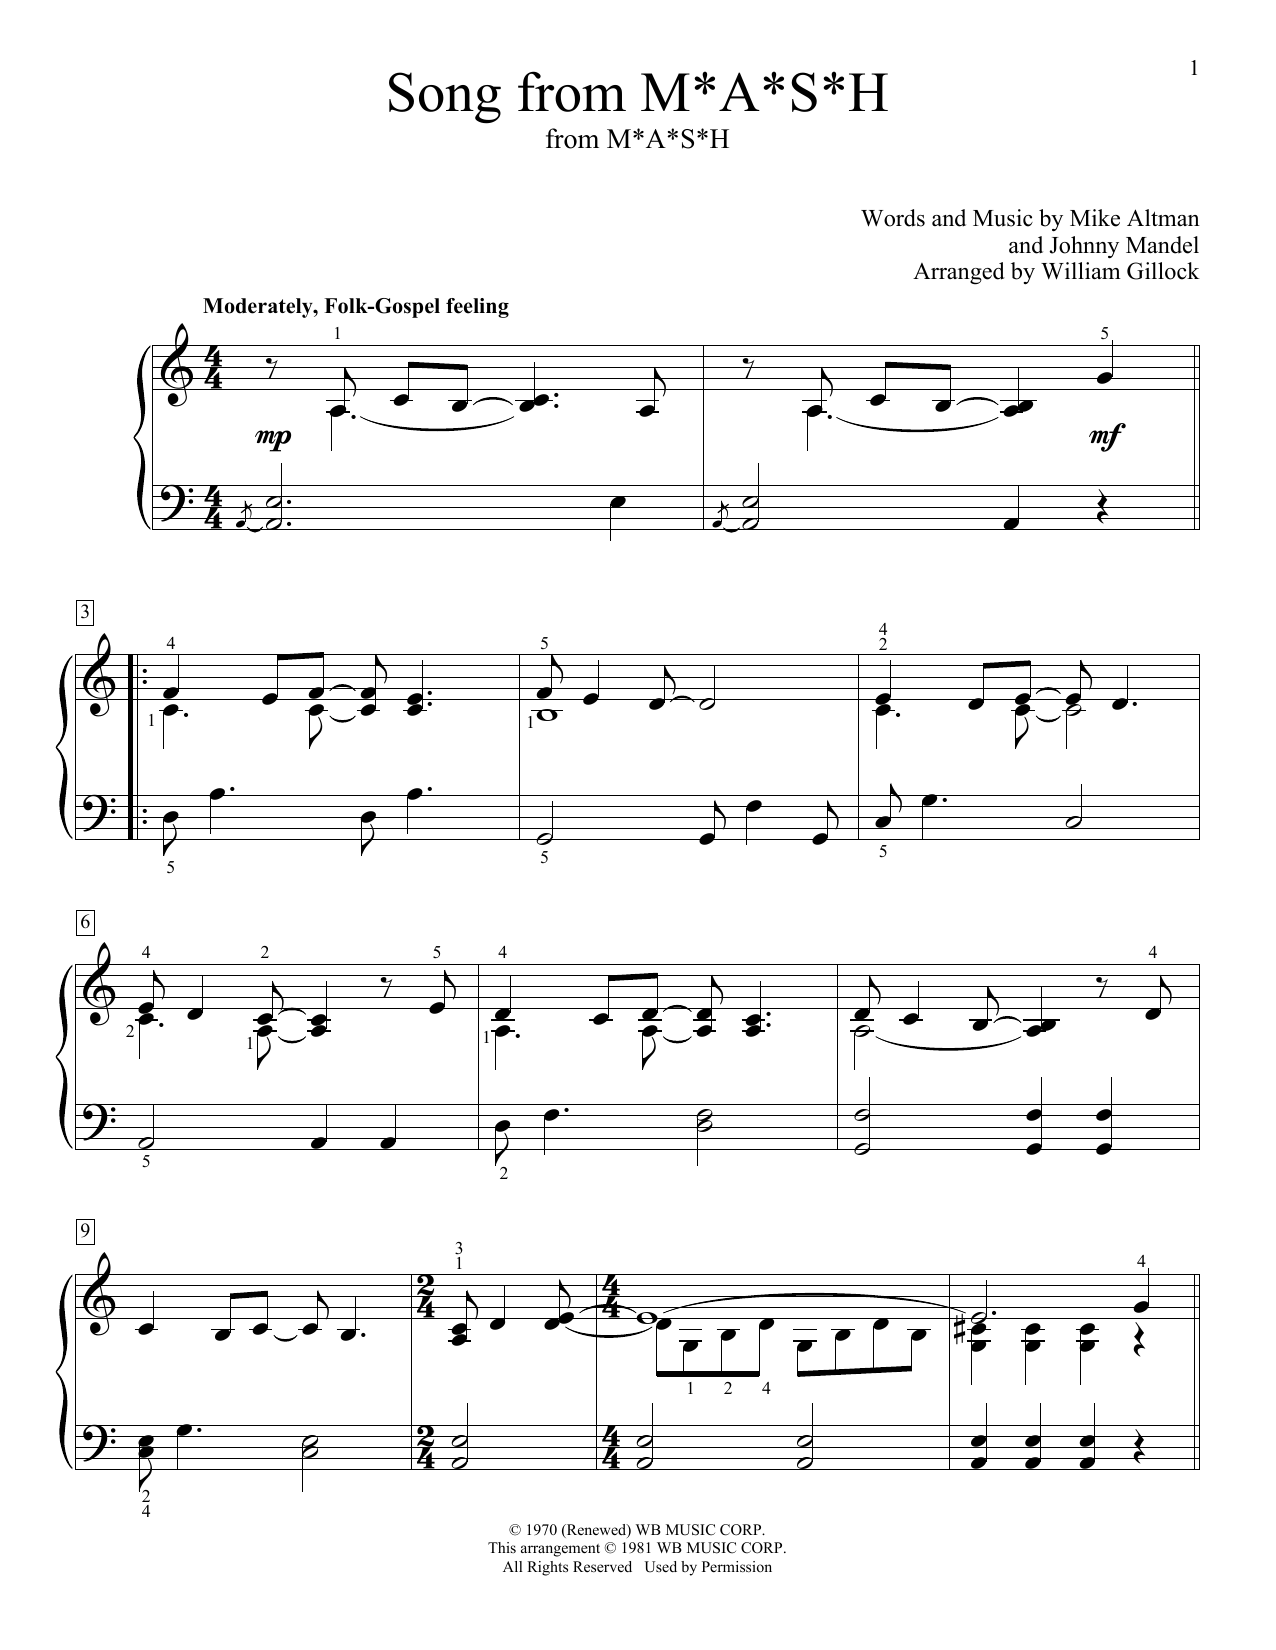 Download Johnny Mandel Song From M*A*S*H (Suicide Is Painless) Sheet Music